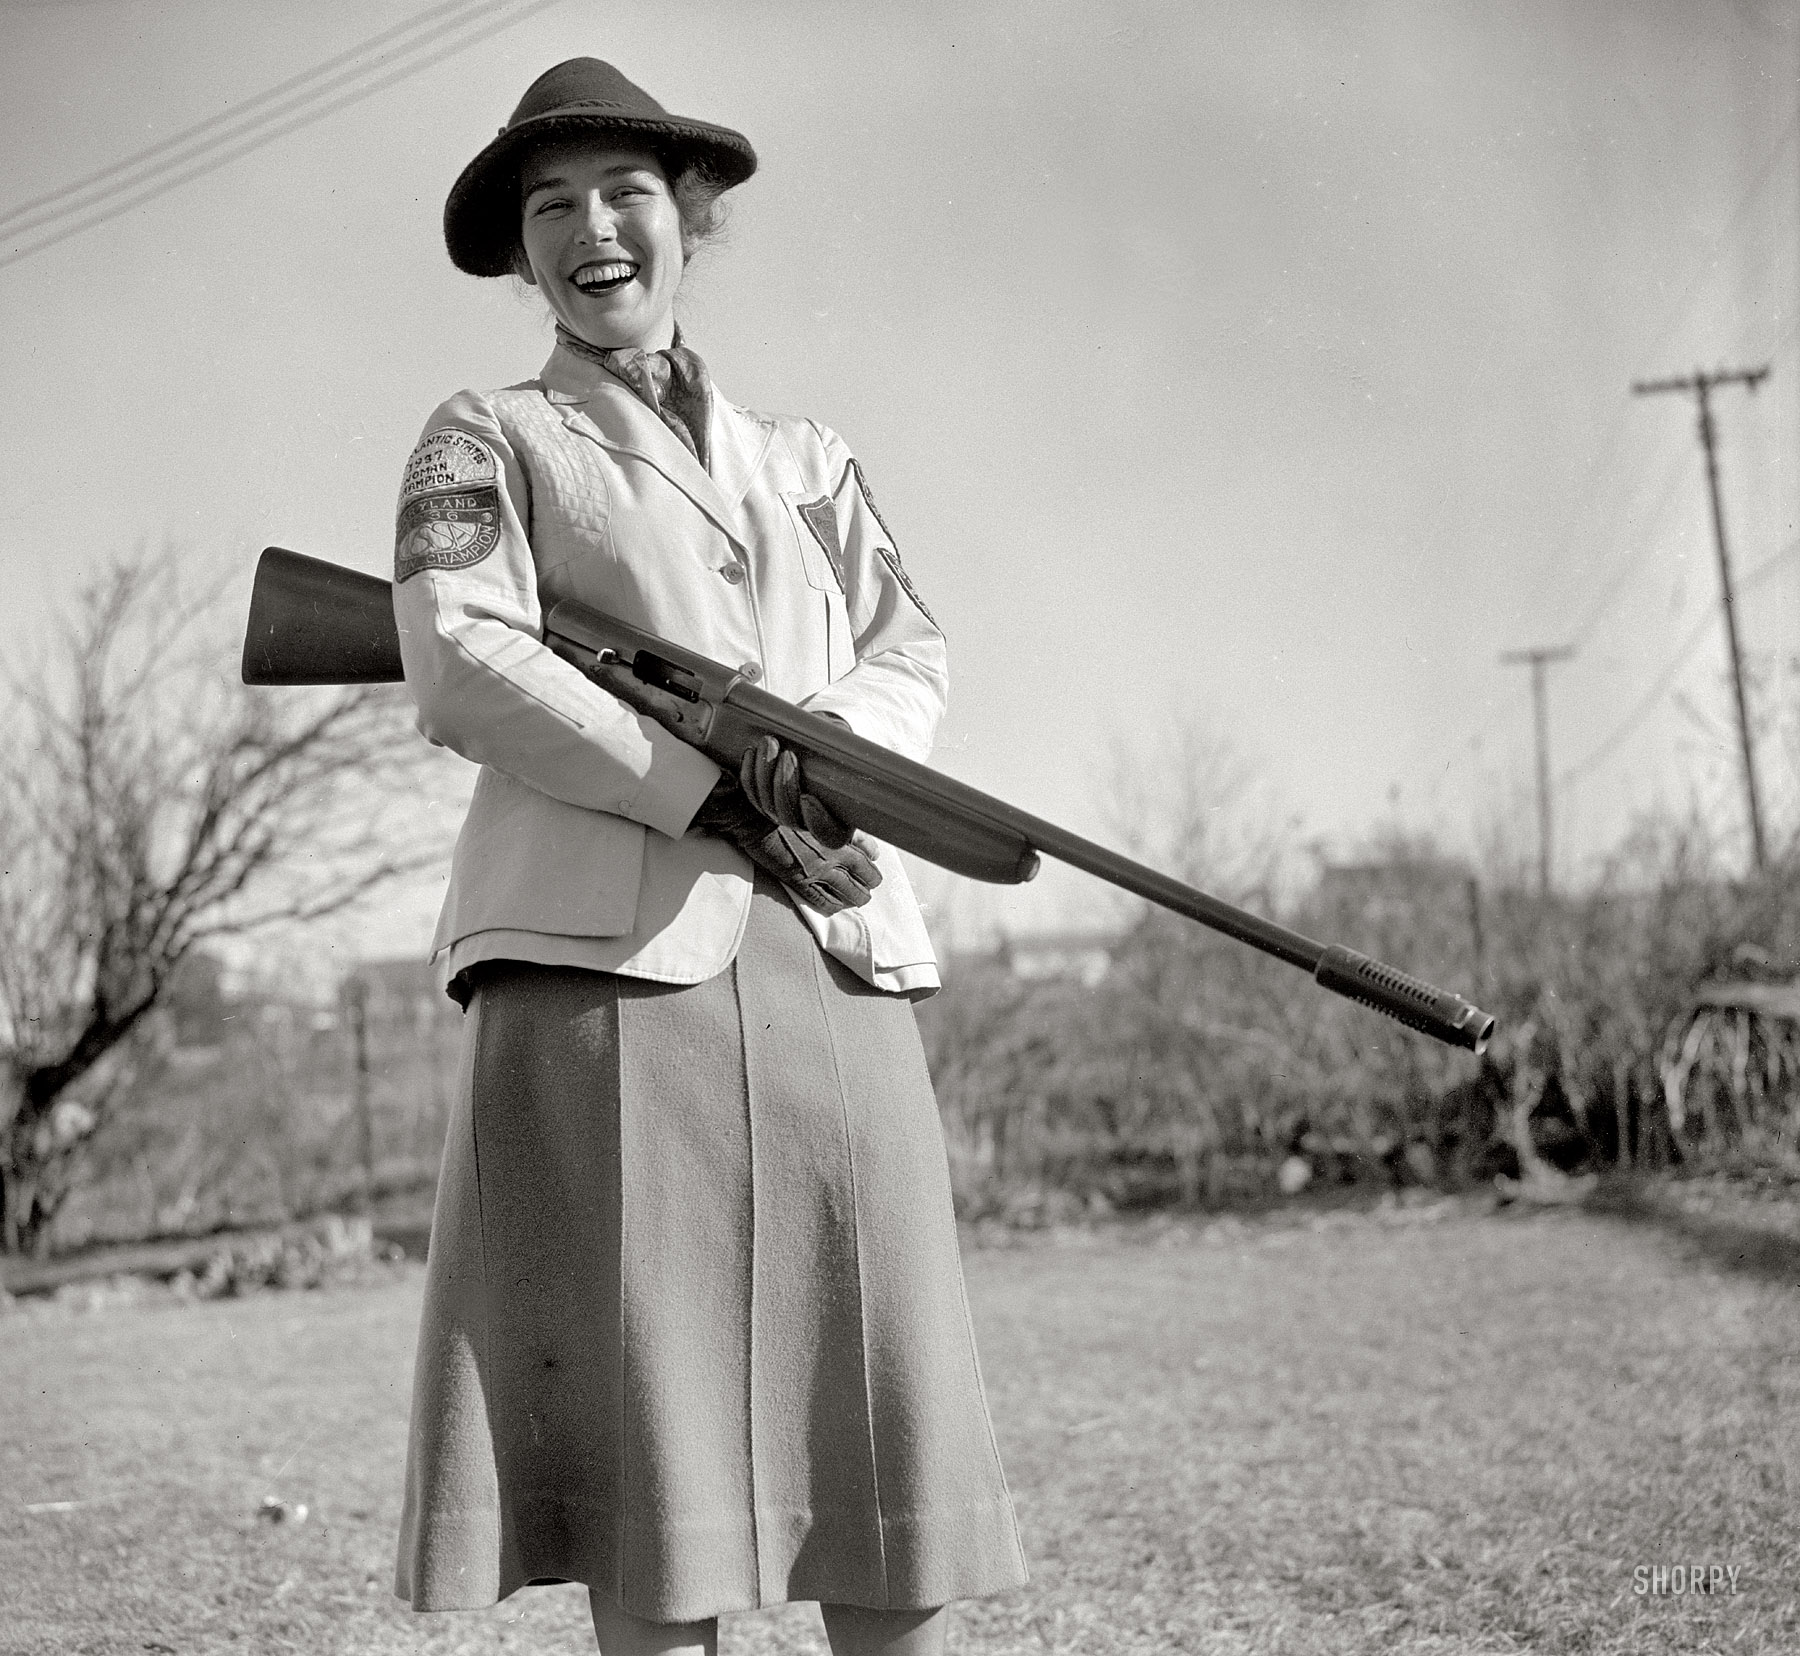 January 5, 1938. Westmoreland Hills, Maryland. "Mrs. Albert F. Walker of this town has been declared 1937 women's skeet shooting champion of the country by the National Skeet Shooting Association. The Association has released the averages on which the ratings were based, but one day last year at the Kenwood skeet club, Mrs. Walker set the women's record fall with 99x100 (skeet for 99 birds out of a possible 100). In addition to her national title, she outranks both men and women shooters in the District of Columbia and Maryland." Harris & Ewing Collection glass negative. View full size.